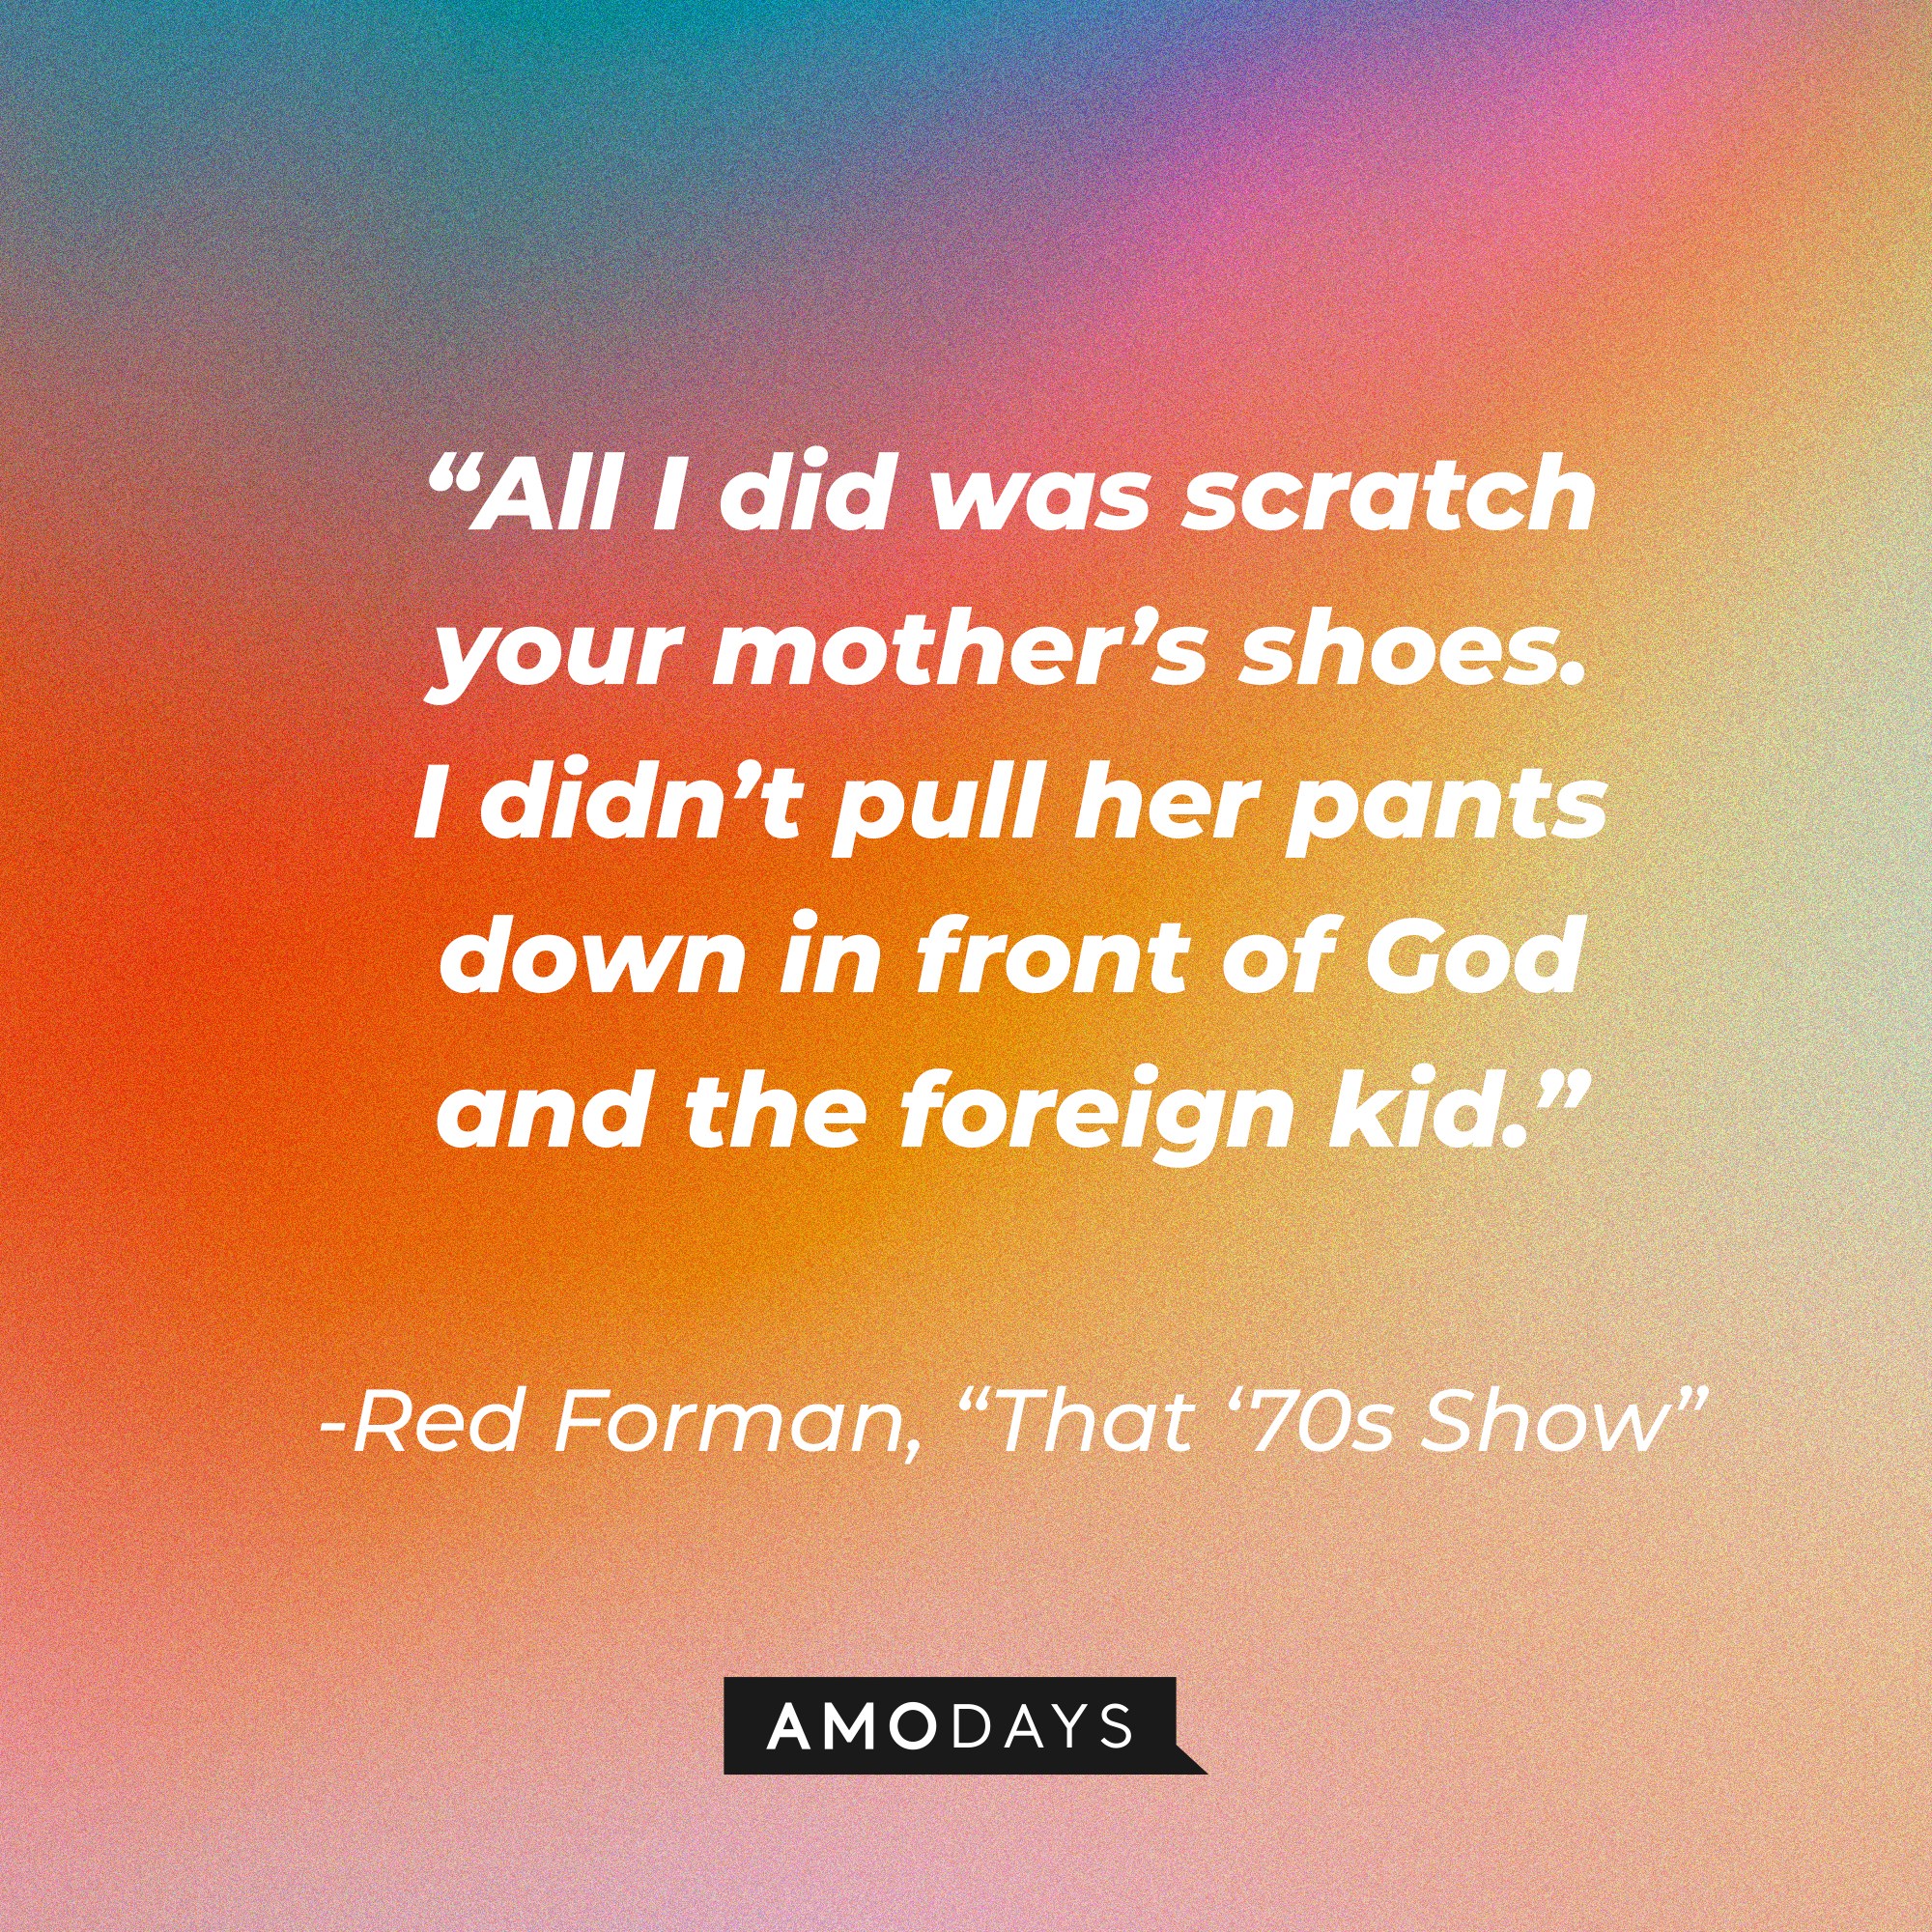 Red Forman's quote from "That '70s Show:" “All I did was scratch your mother’s shoes. I didn’t pull her pants down in front of God and the foreign kid.” | Source: AmoDays